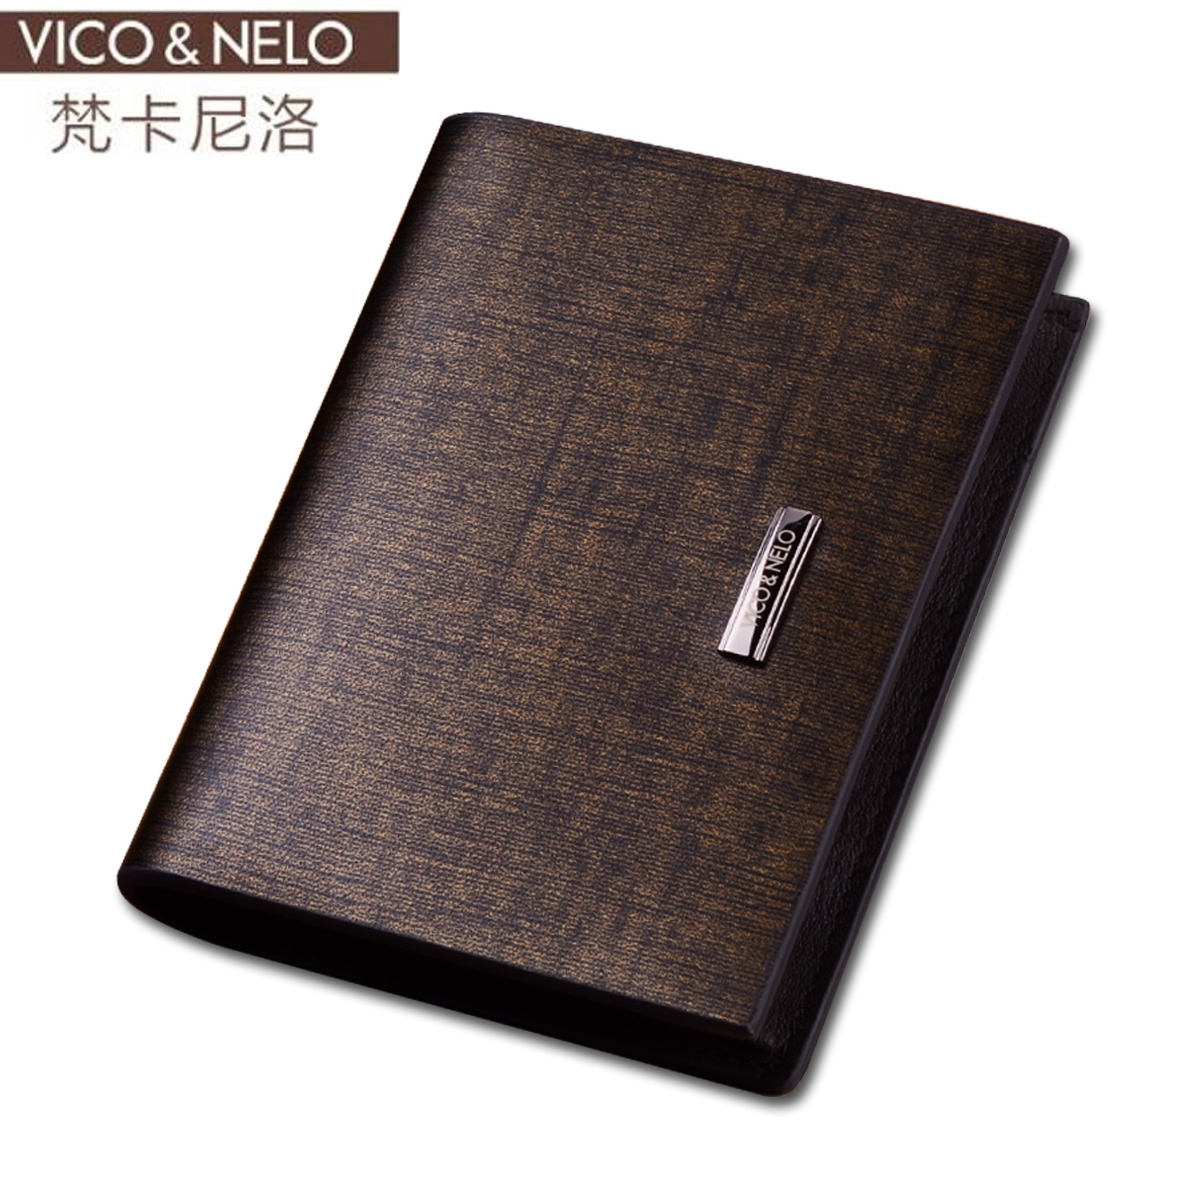 Viconelo male cowhide card holder silicon carbide card holder male driver's license engraving gift